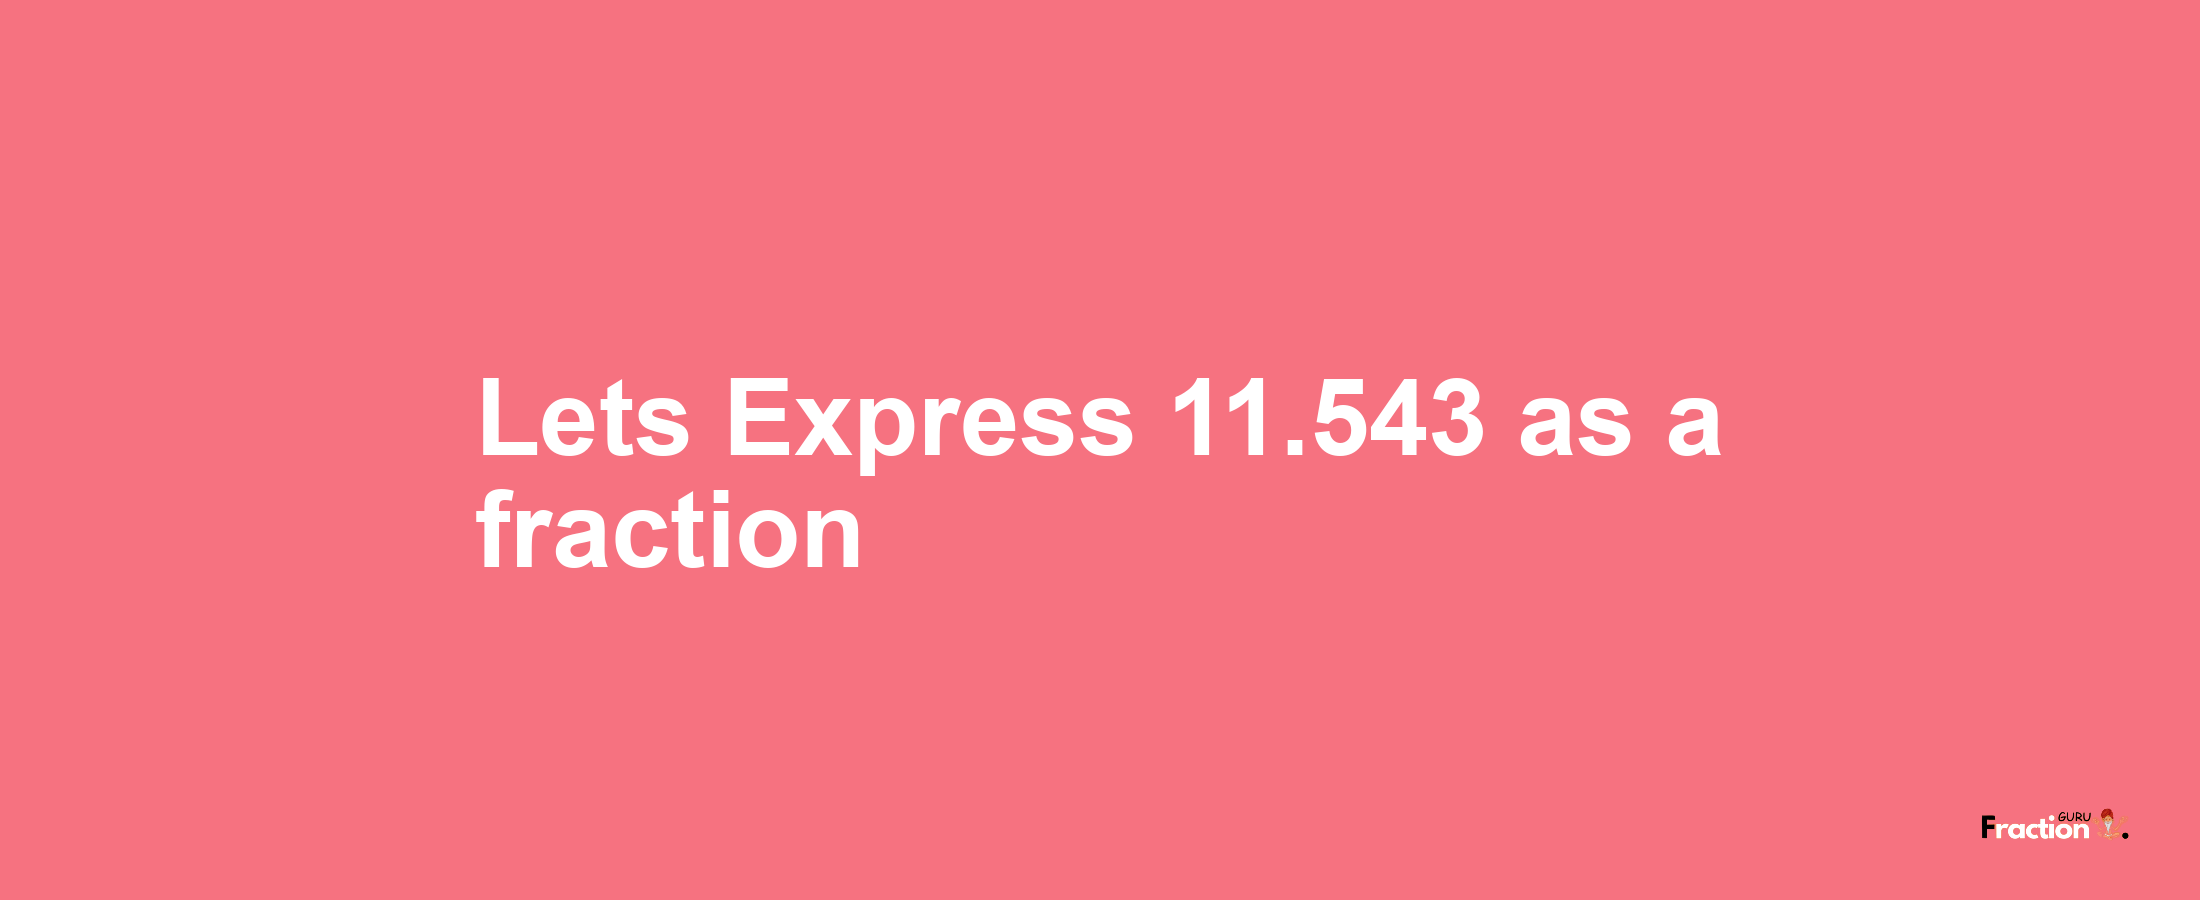 Lets Express 11.543 as afraction